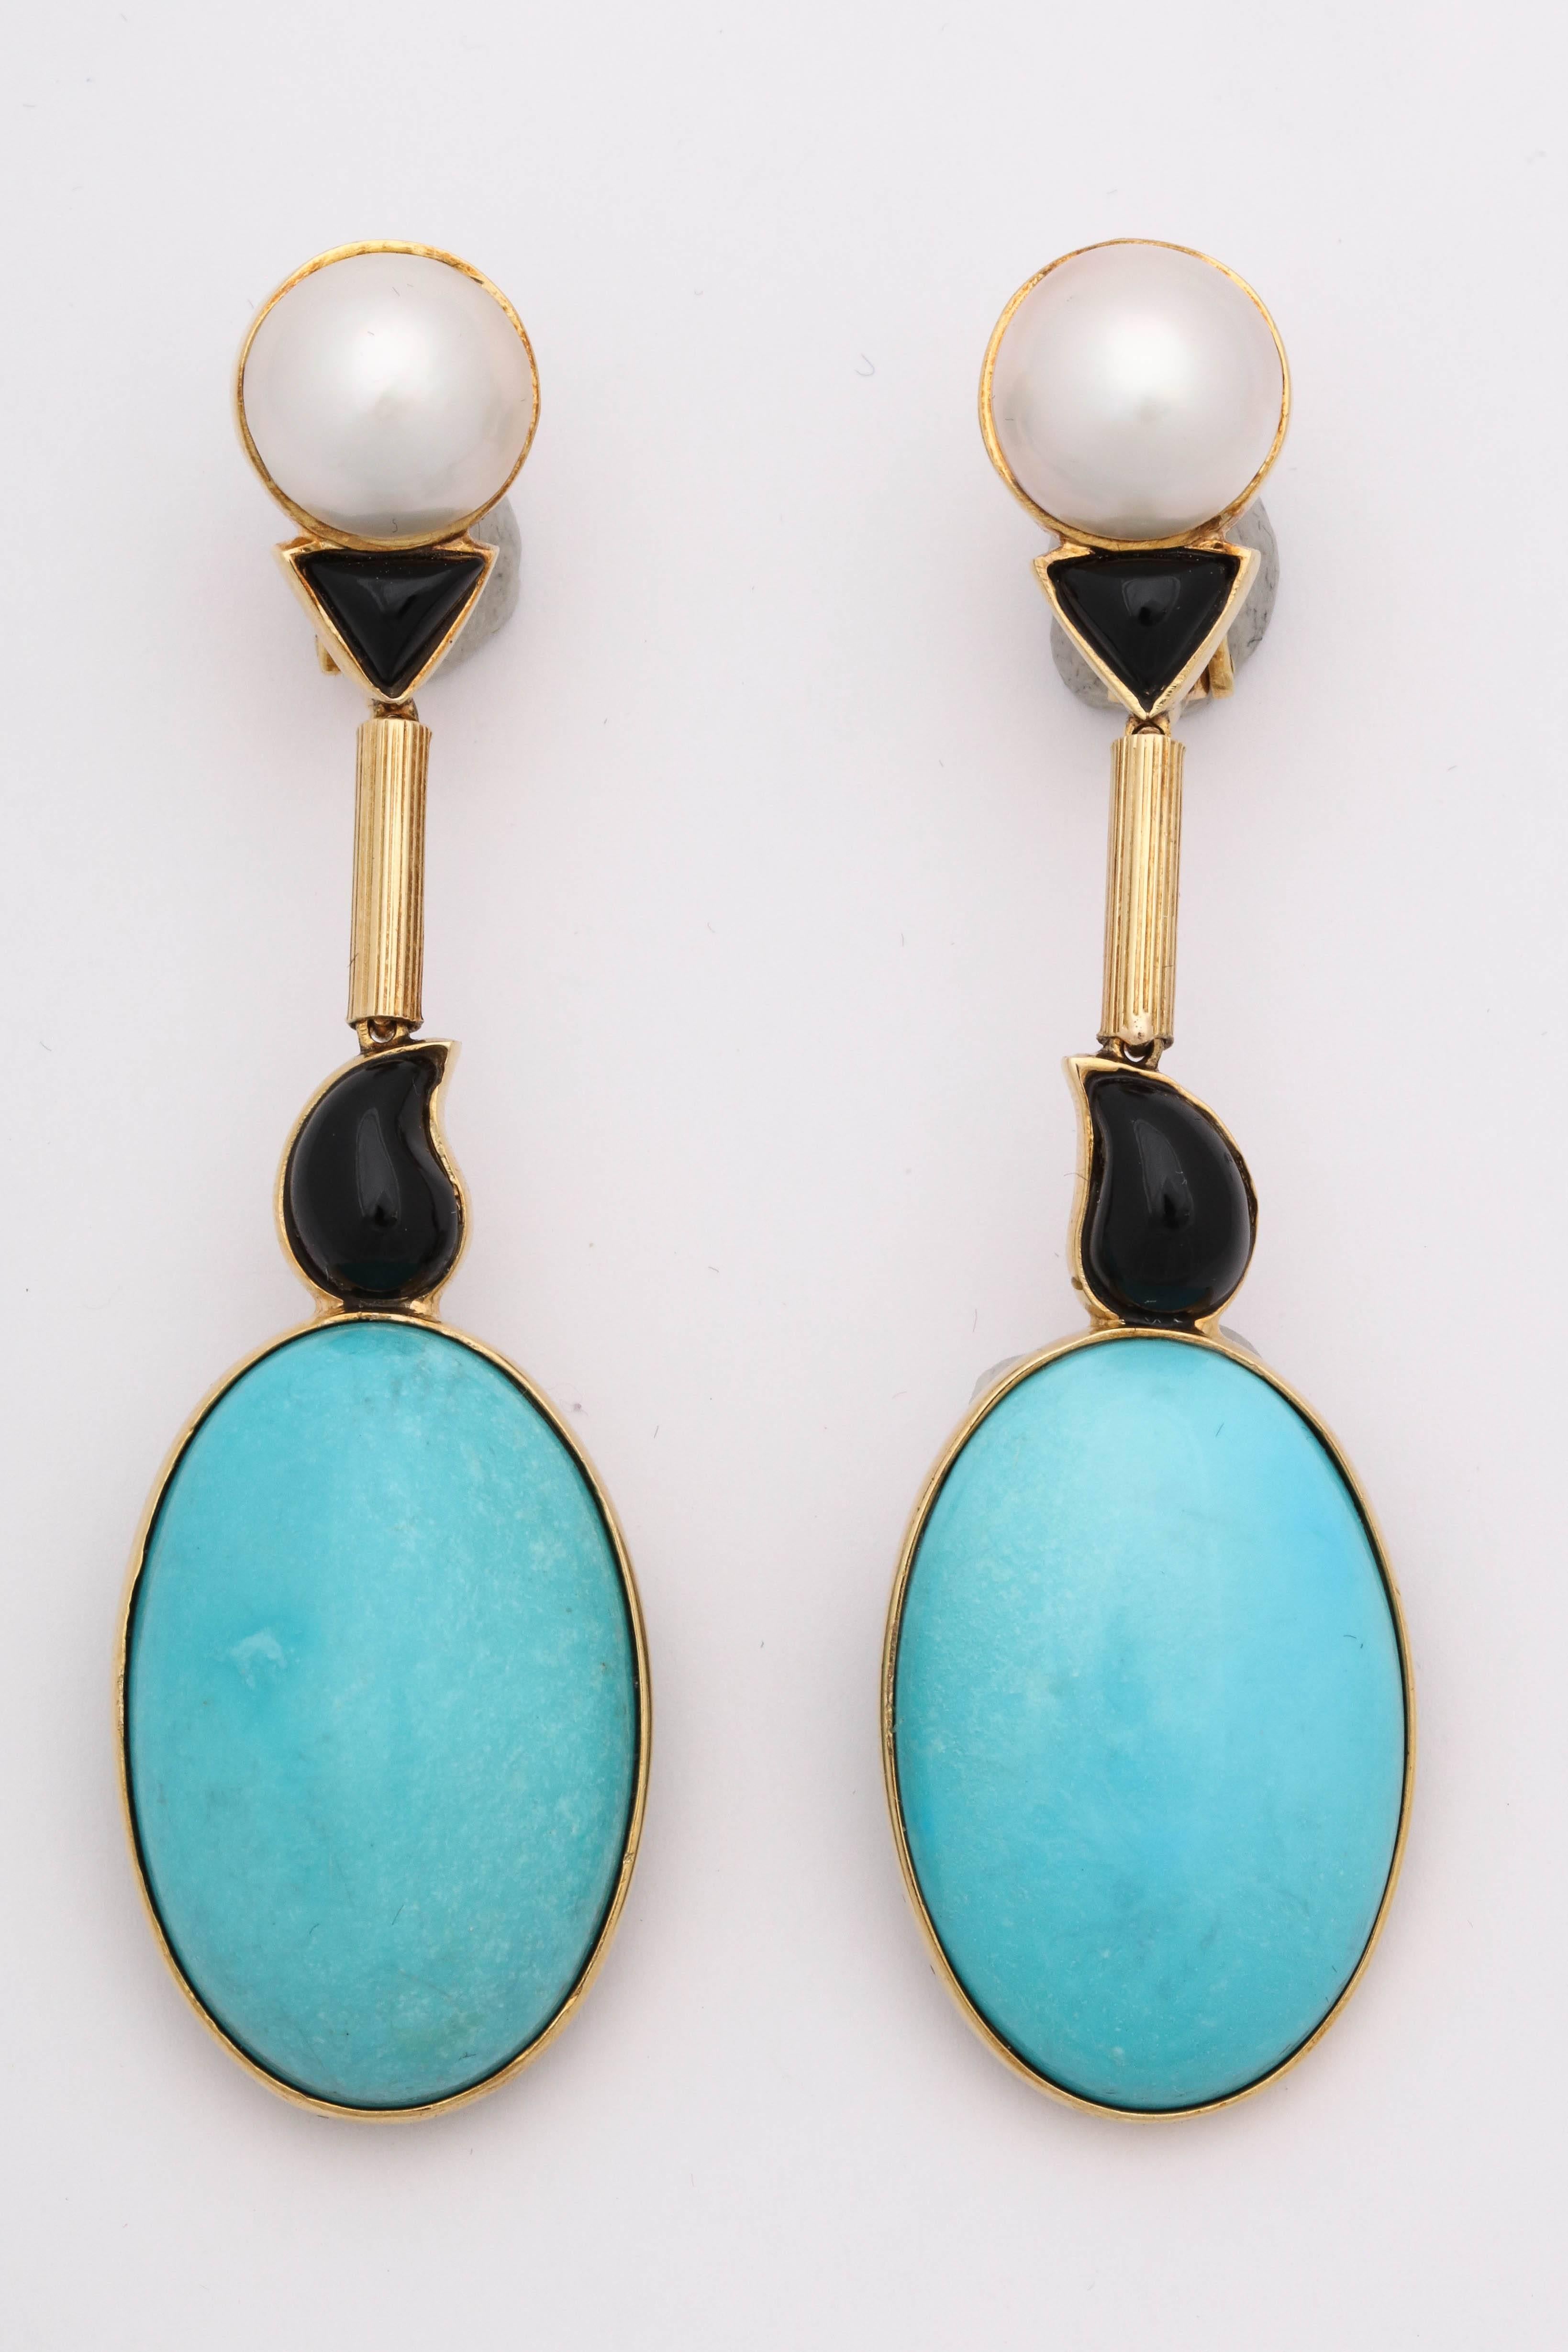 One Pair Of Ladies Long Pendant Drop 18kt Gold Earrings Designed With Two Large Bezel Set Sleeping Beauty Turquoises Measuring Approximately 32MM Each Stone,These Pendant Drop Clip On Earrings Are Also Designed With Two Palsey Custom Cut Onyxes